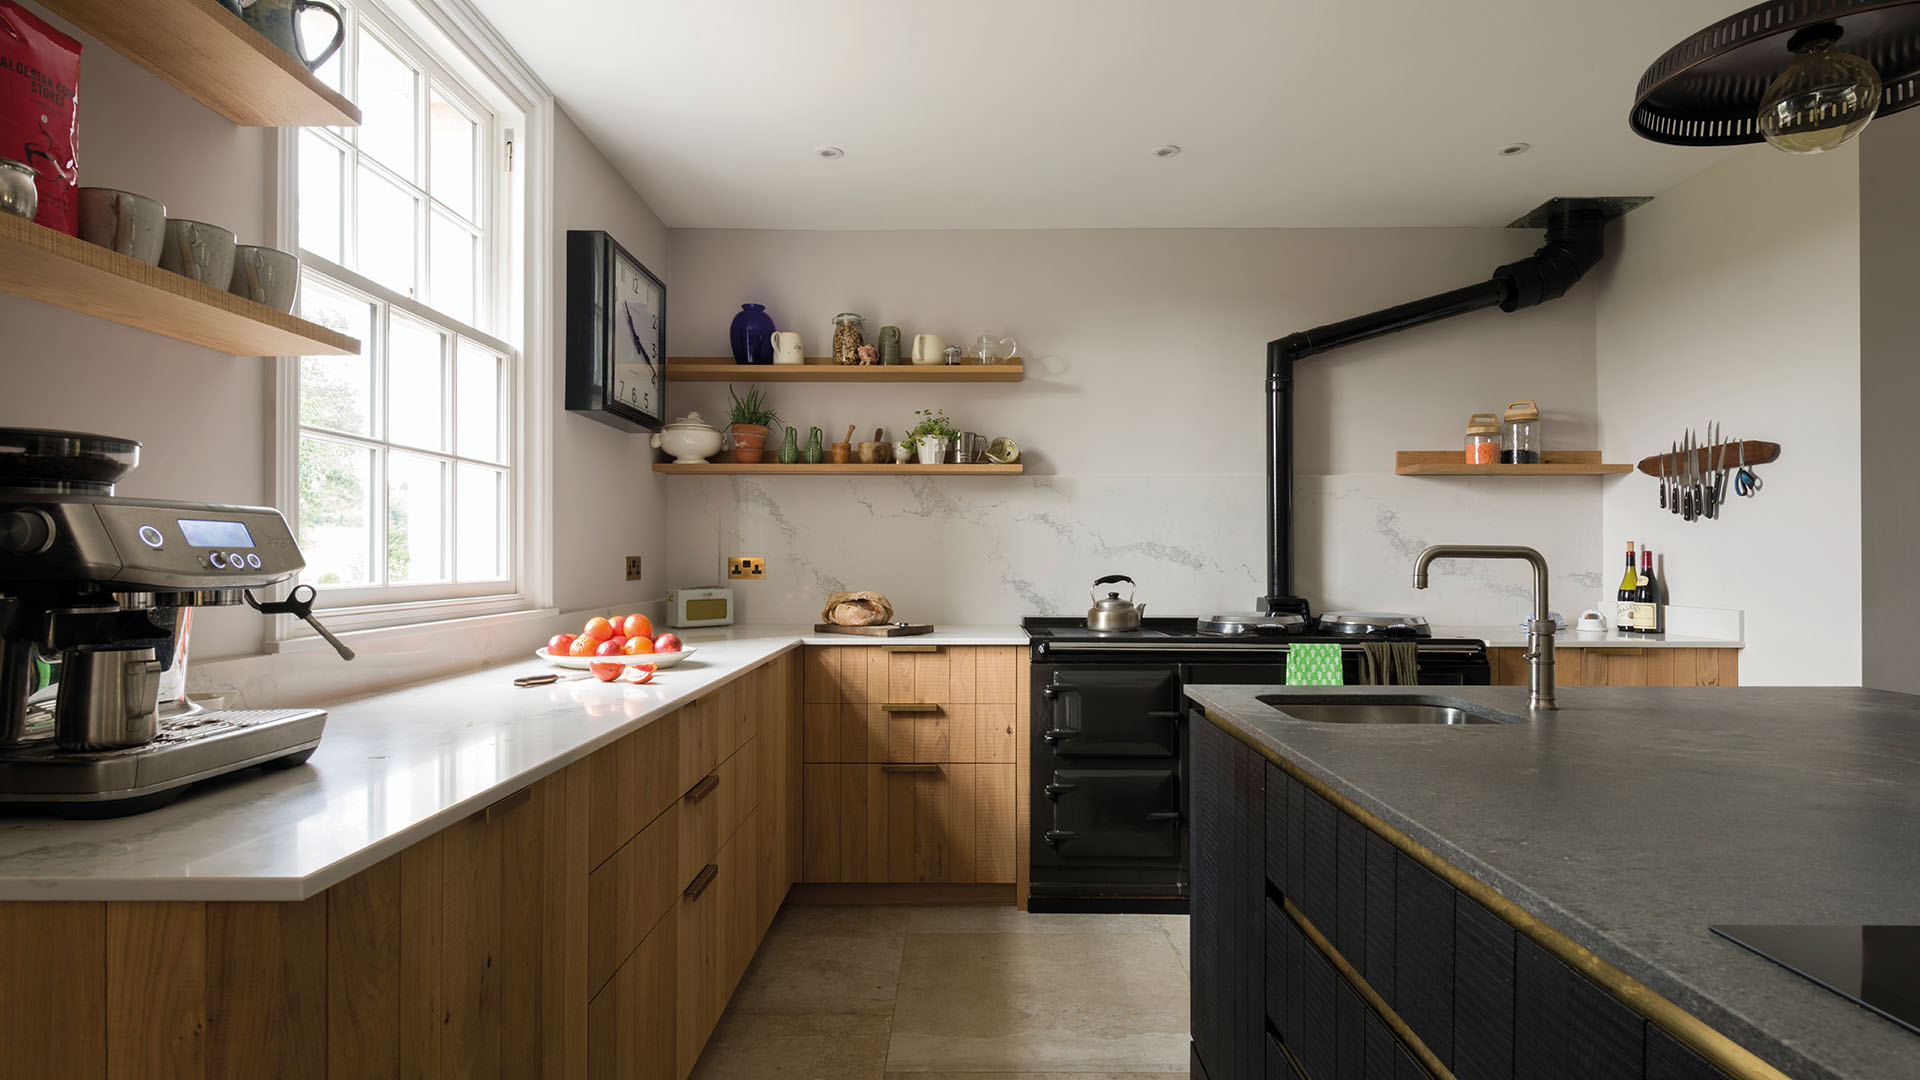 Case Study: An Industrial Kitchen in Kent